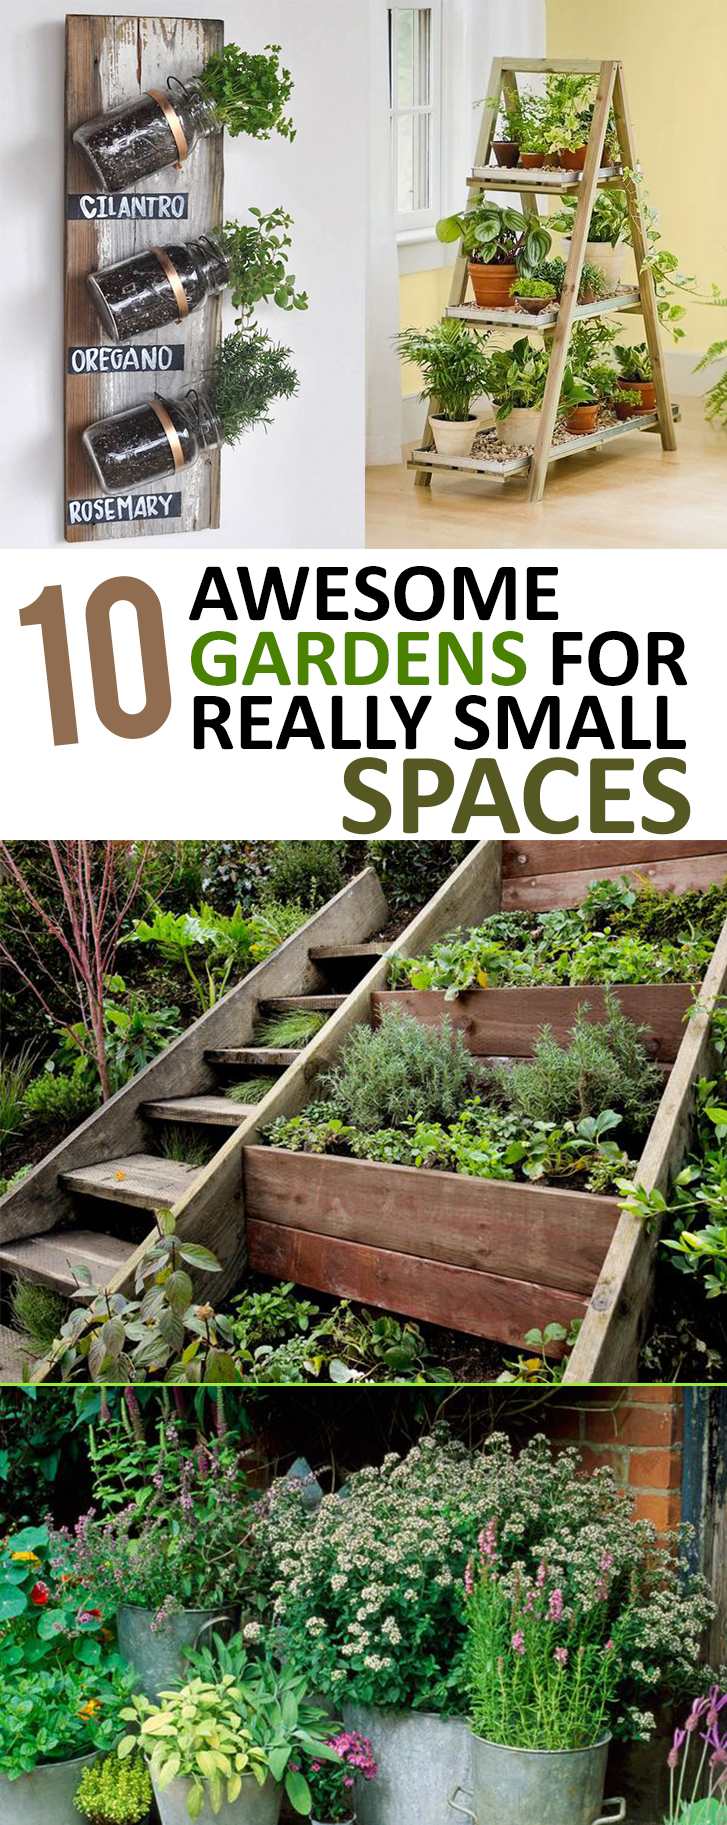 10 Awesome Gardens for Really Small Spaces – Sunlit Spaces | DIY Home